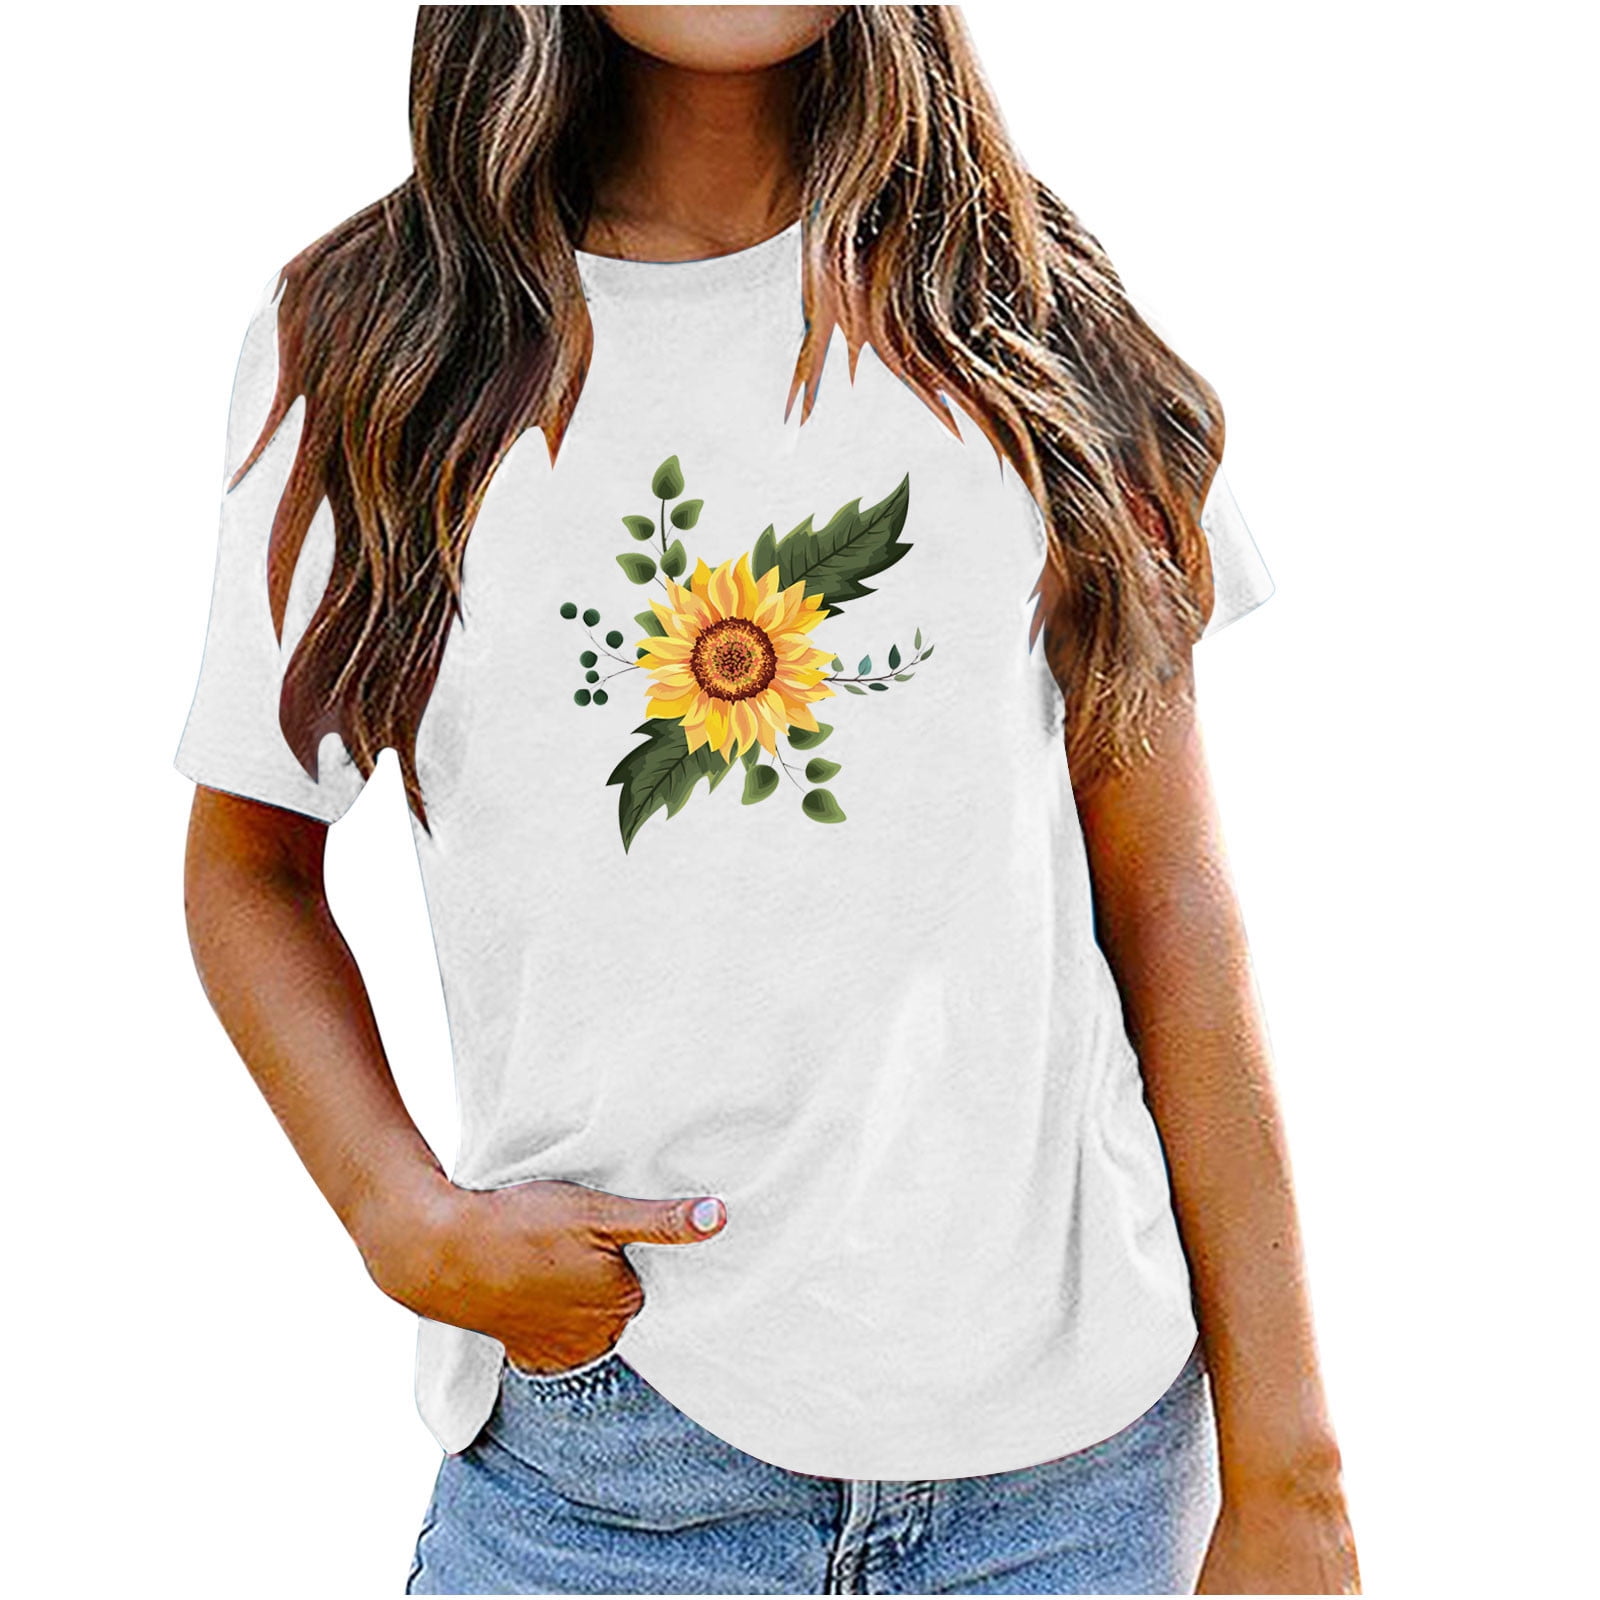  Summer Plus Women's Summer Sunflower T Shirt Cute,1 Items one  Dollar Items only,Open Box Deals Clearance in Warehouse,Todays Deals of The  Day,Boho t : Sports & Outdoors